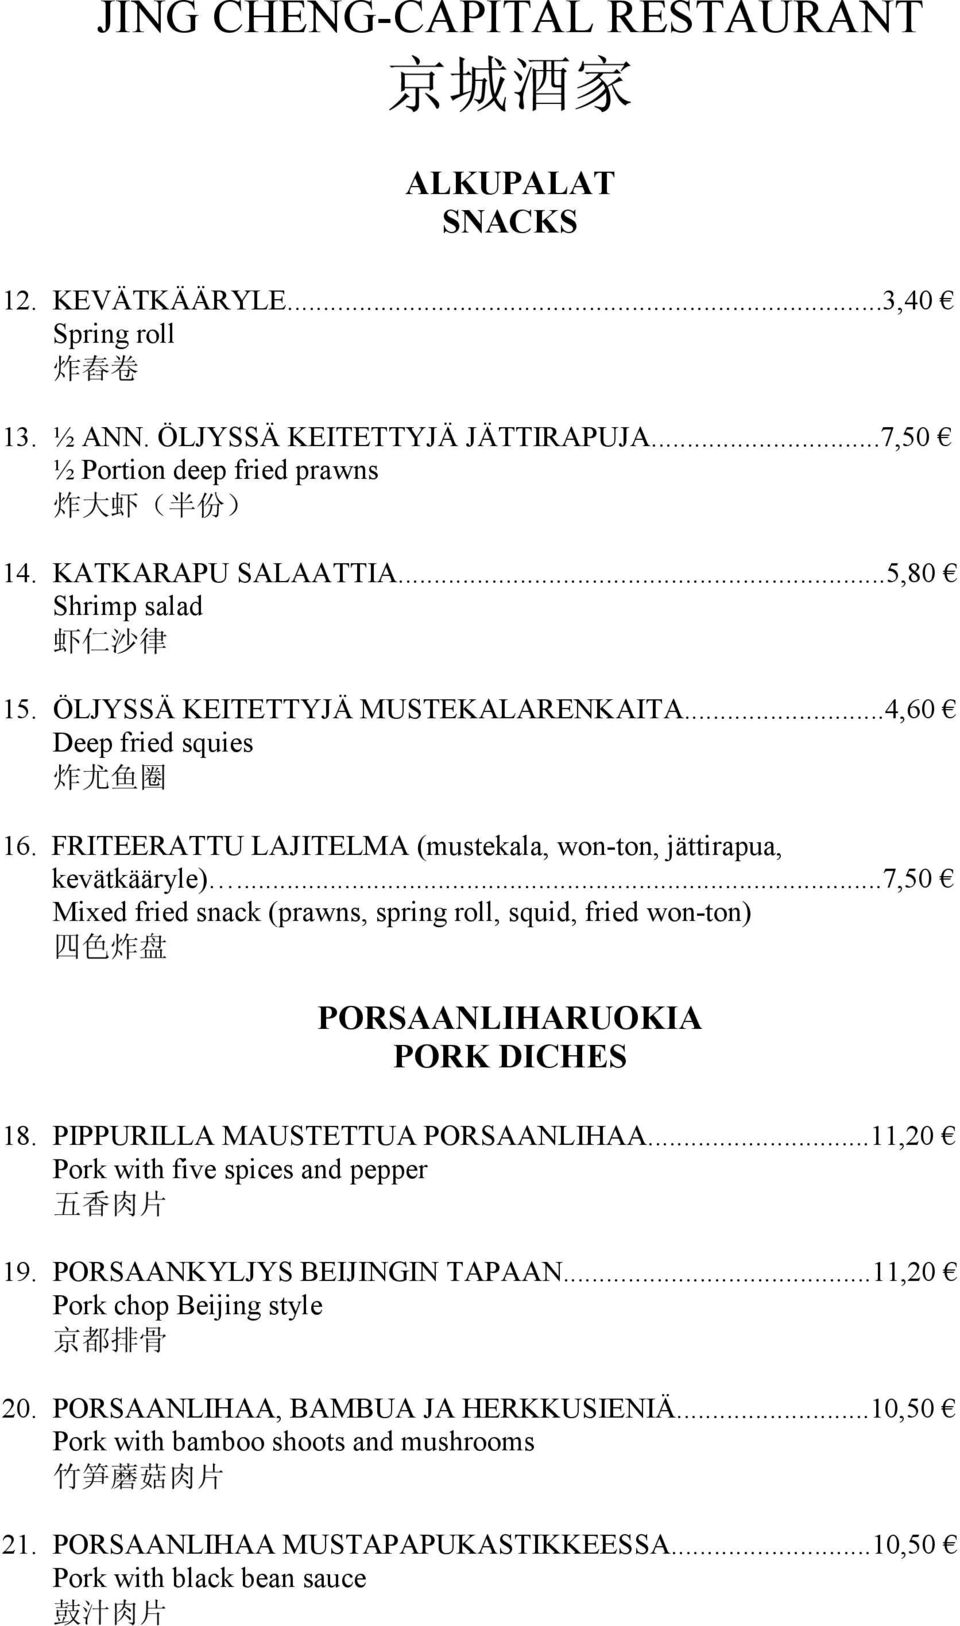 ..7,50 Mixed fried snack (prawns, spring roll, squid, fried won-ton) PORSAANLIHARUOKIA PORK DICHES 18. PIPPURILLA MAUSTETTUA PORSAANLIHAA...11,20 Pork with five spices and pepper 19.